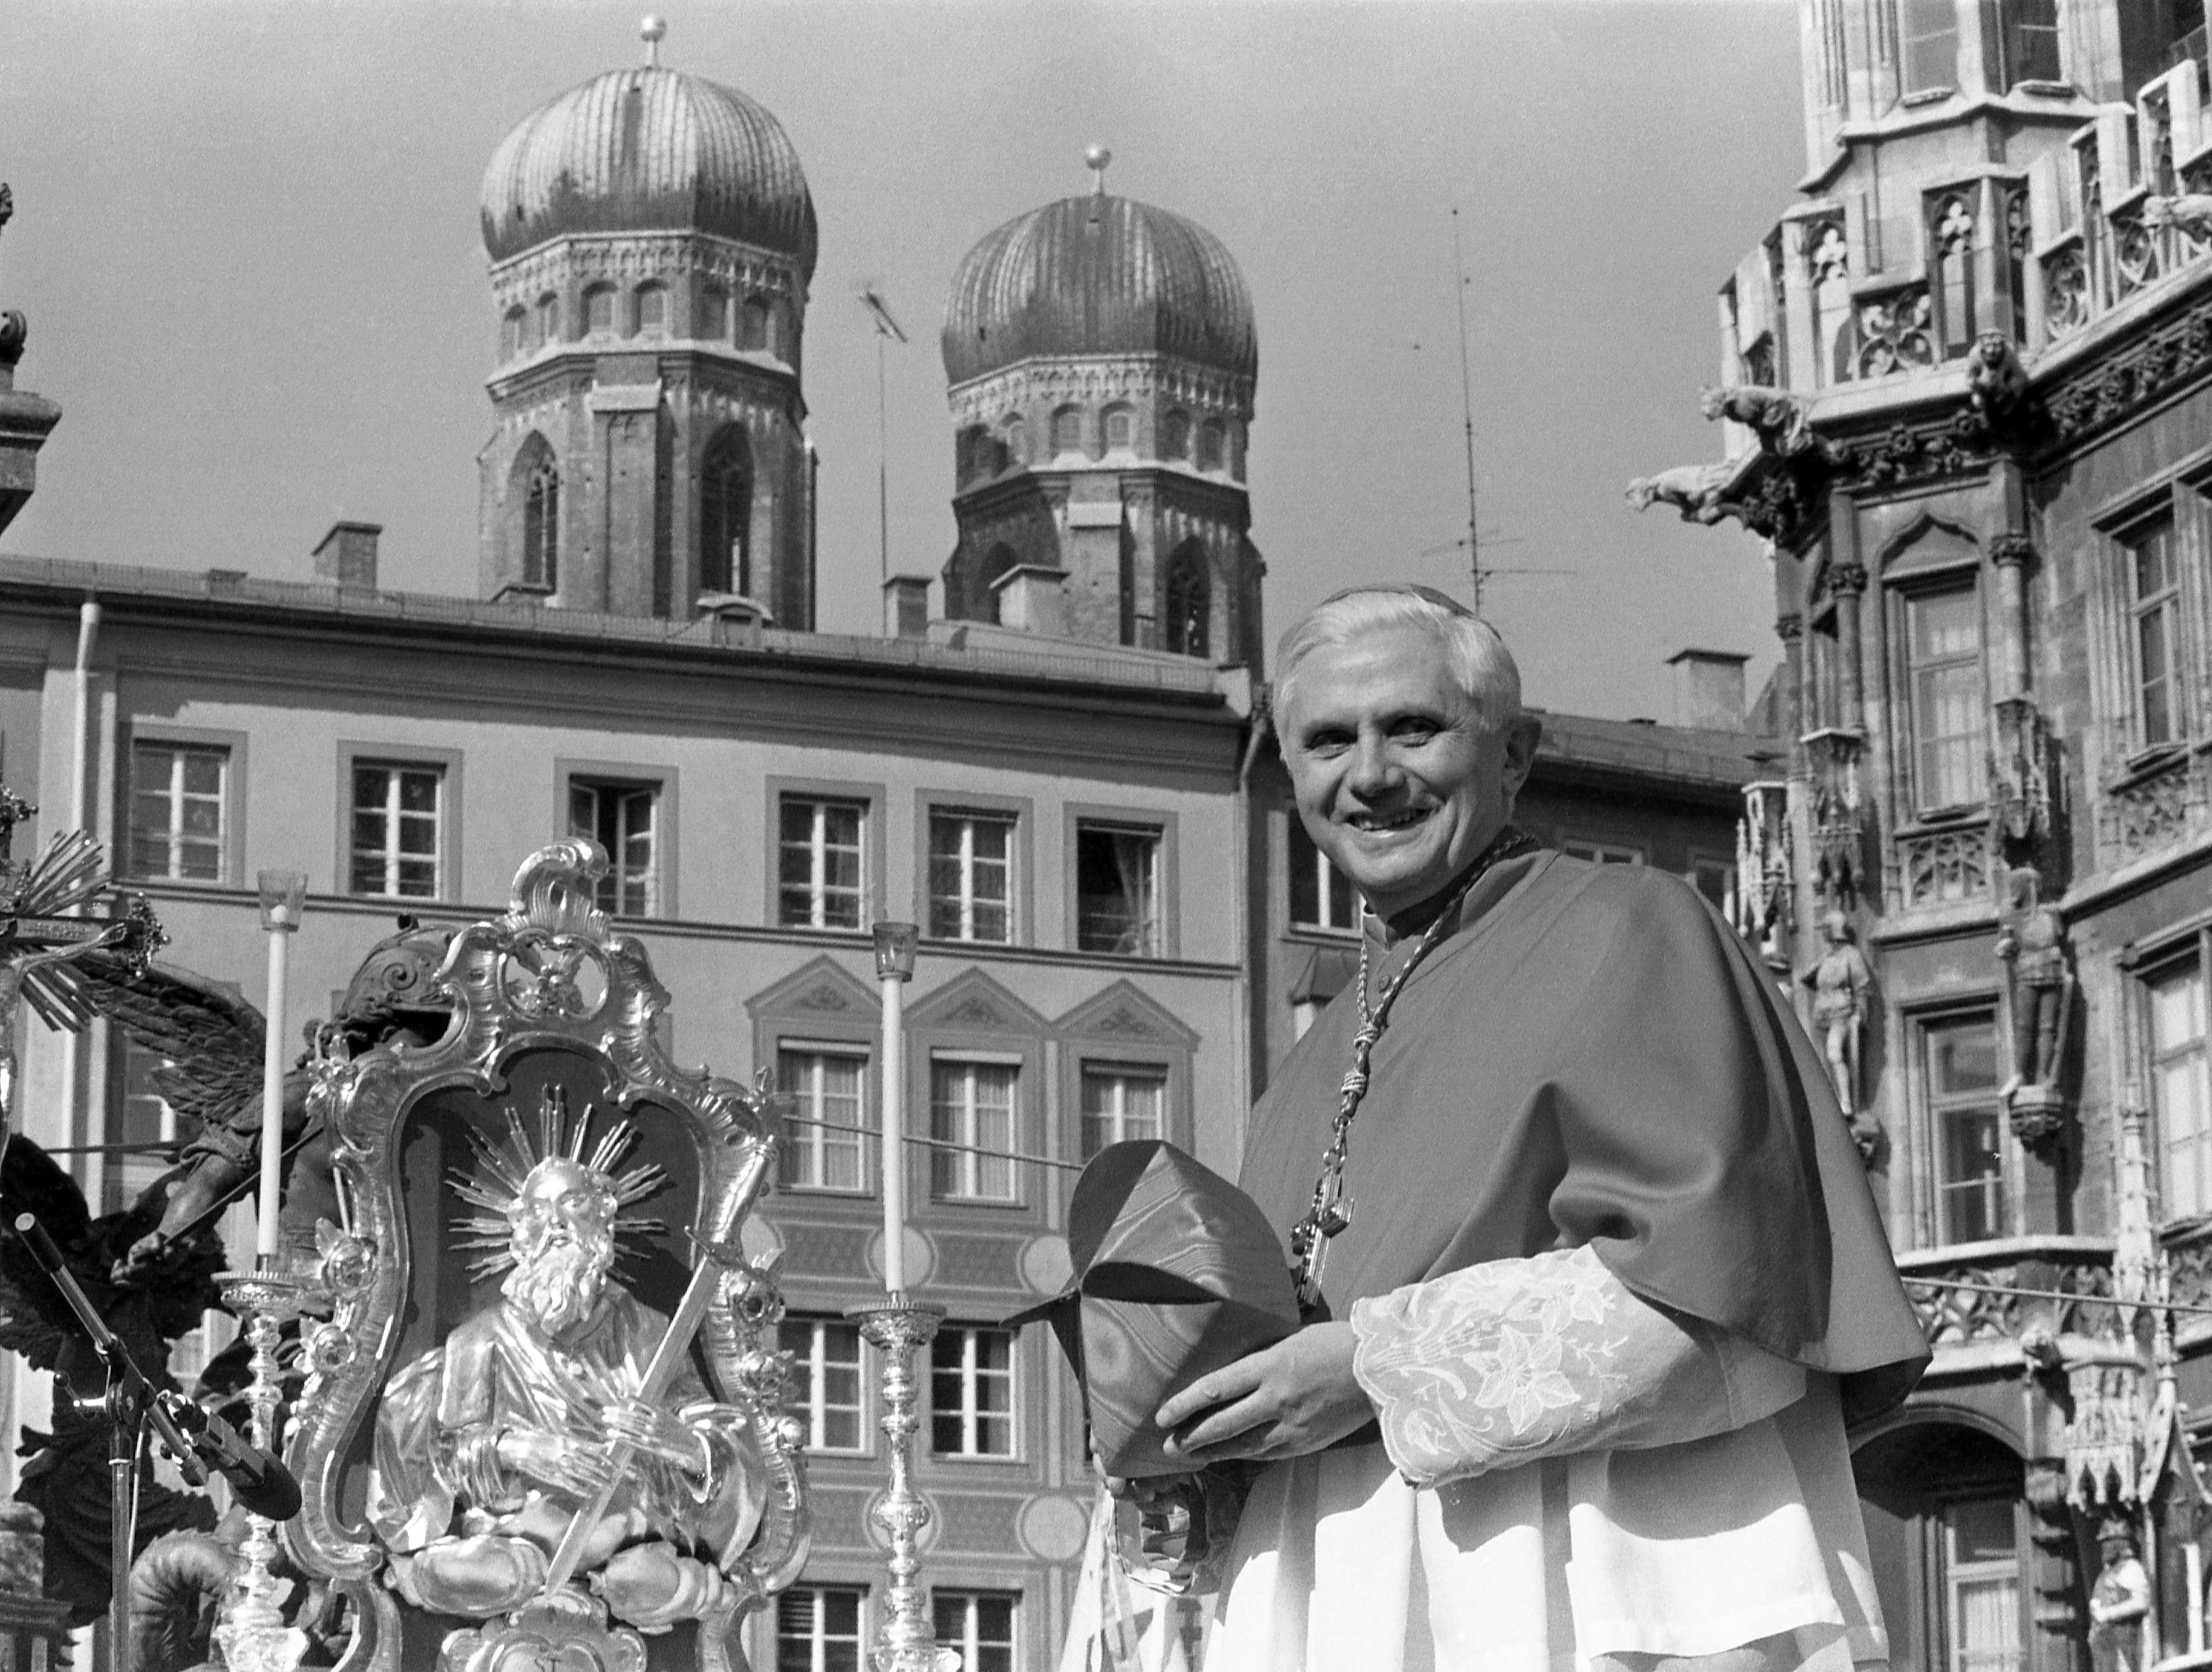 Cardinal Joseph Ratzinger, later Pope Benedict XVI, bids farewell to the Bavarian believers in downtown Munich, Germany, Sunday, Feb. 28, 1982. (AP Photo/Dieter Endlicher, File)